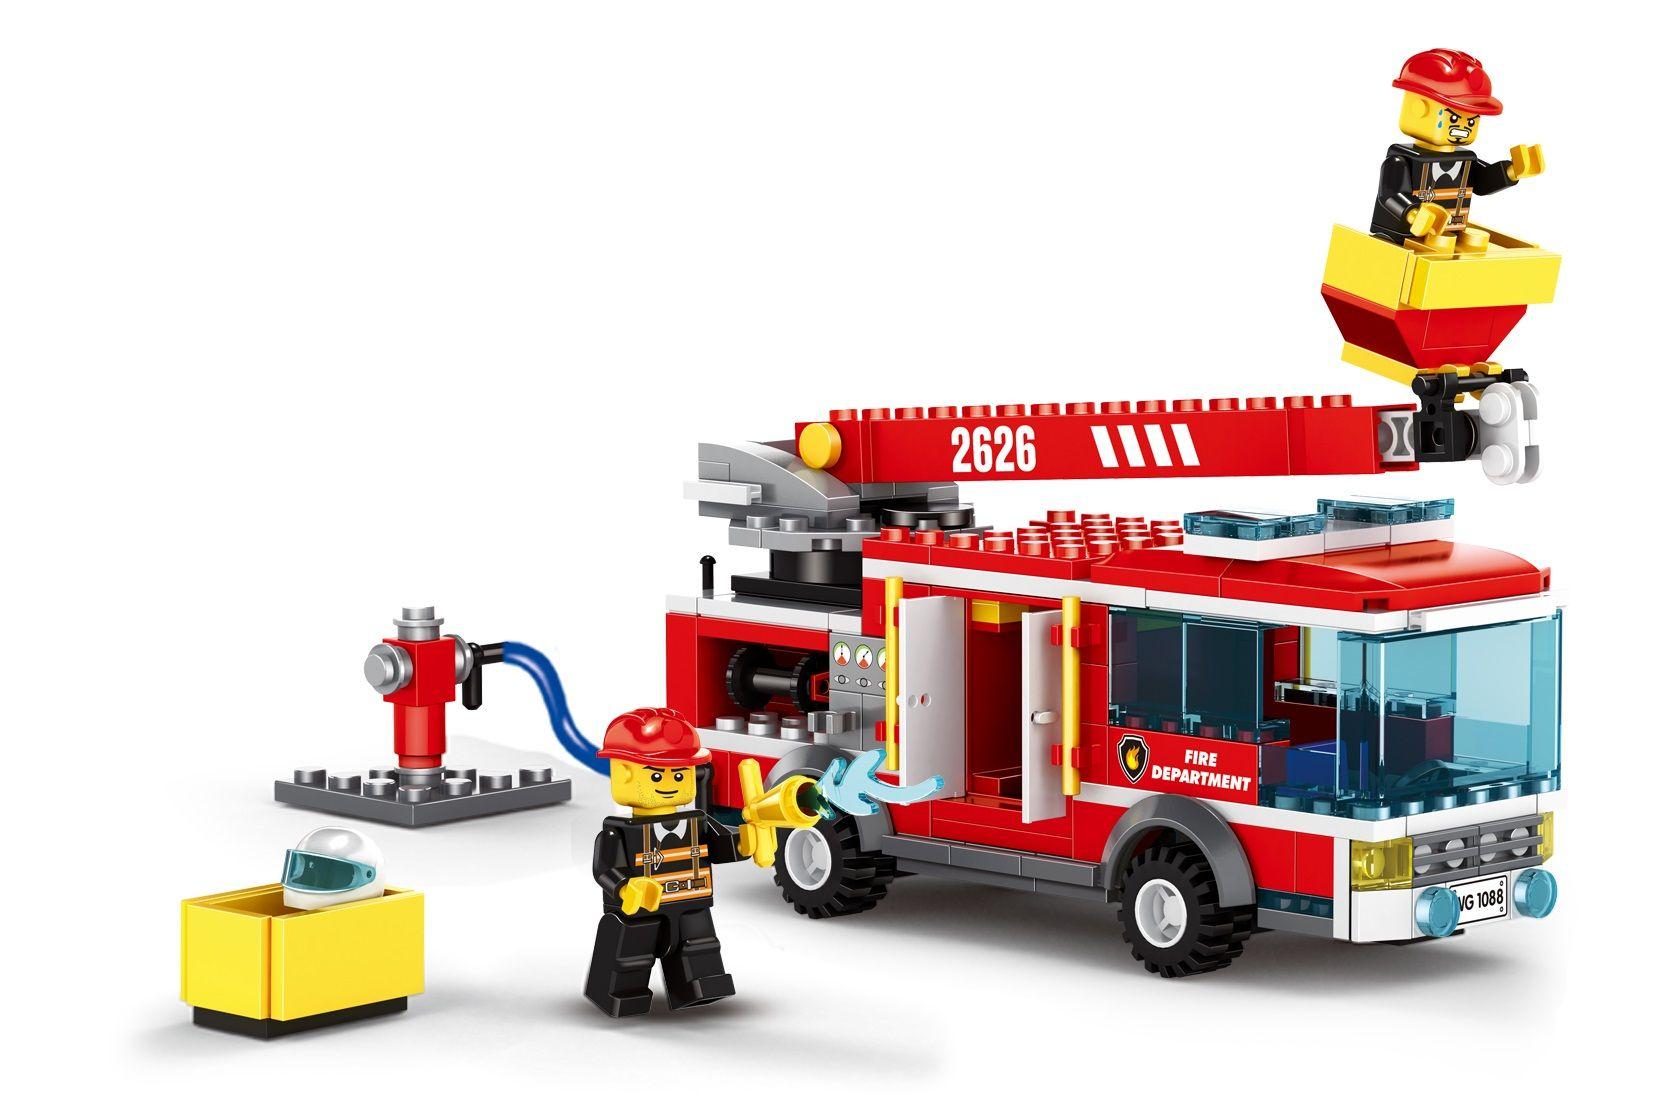 Fire truck with elevating platform